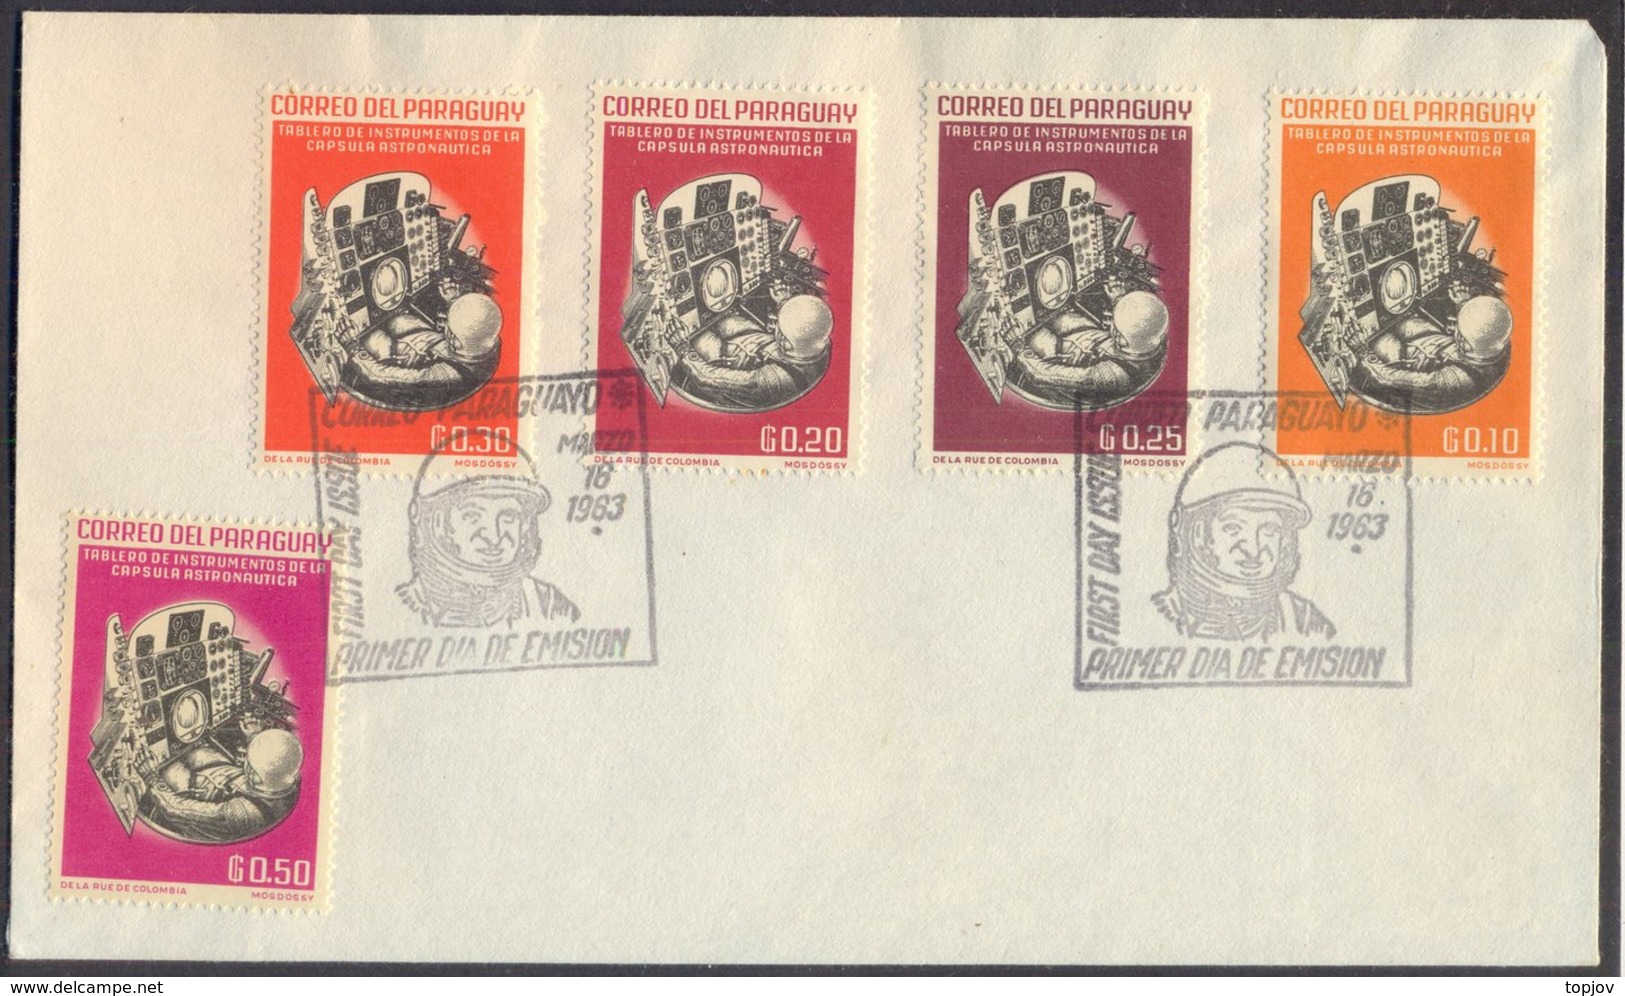 PARAGUAY - SPACE - CABIN ROCKETS - INSTRUMENTS - SCHIRRA - FDC - 1963 - South America